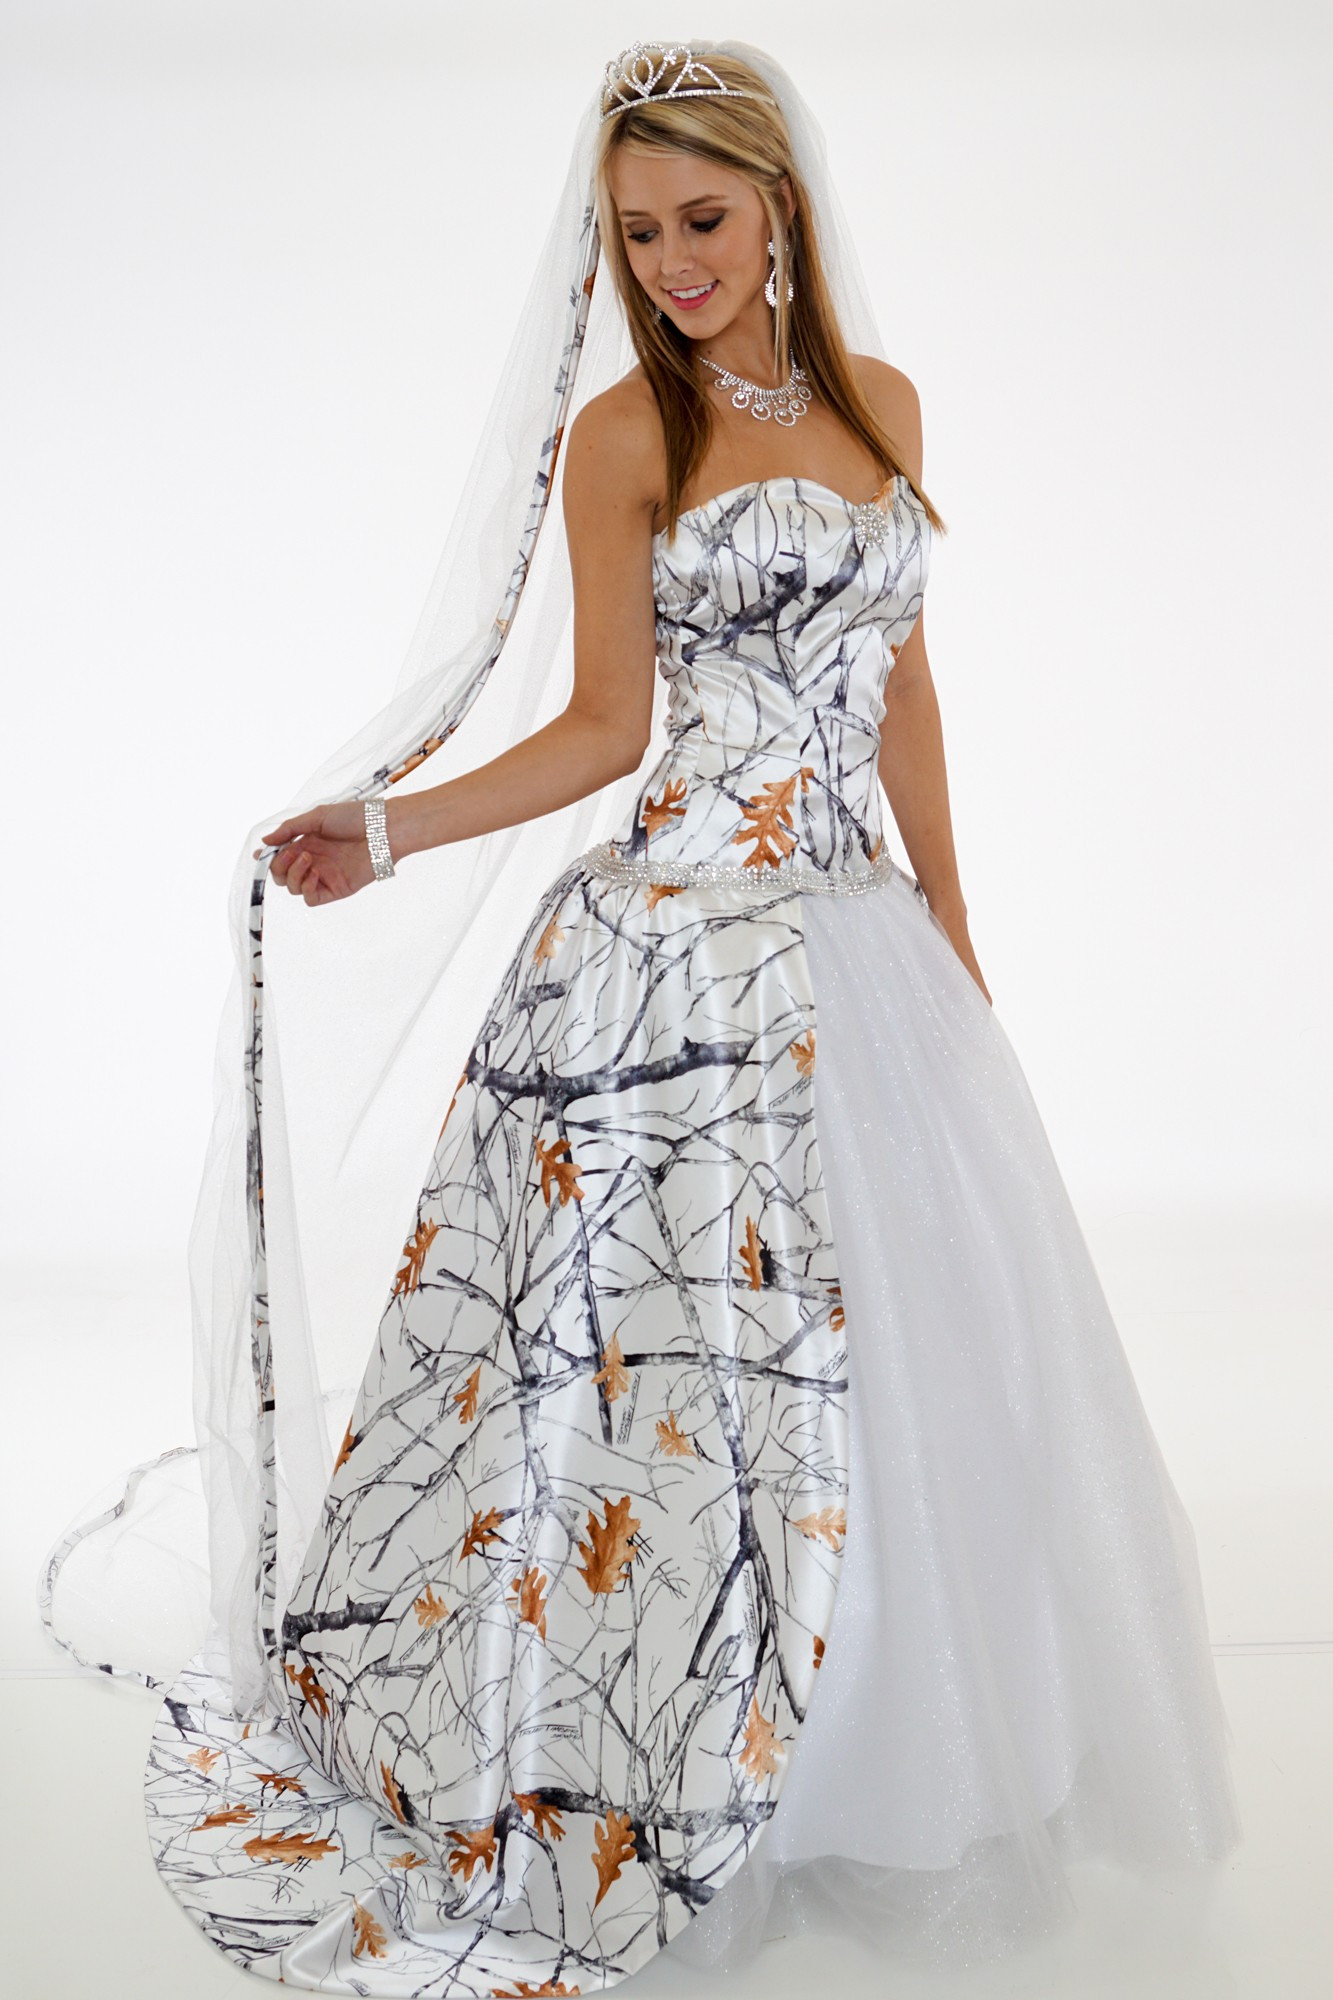 Camo Wedding Dresses Cheap
 20 Camo Wedding Dresses Ideas You Must Love MagMent